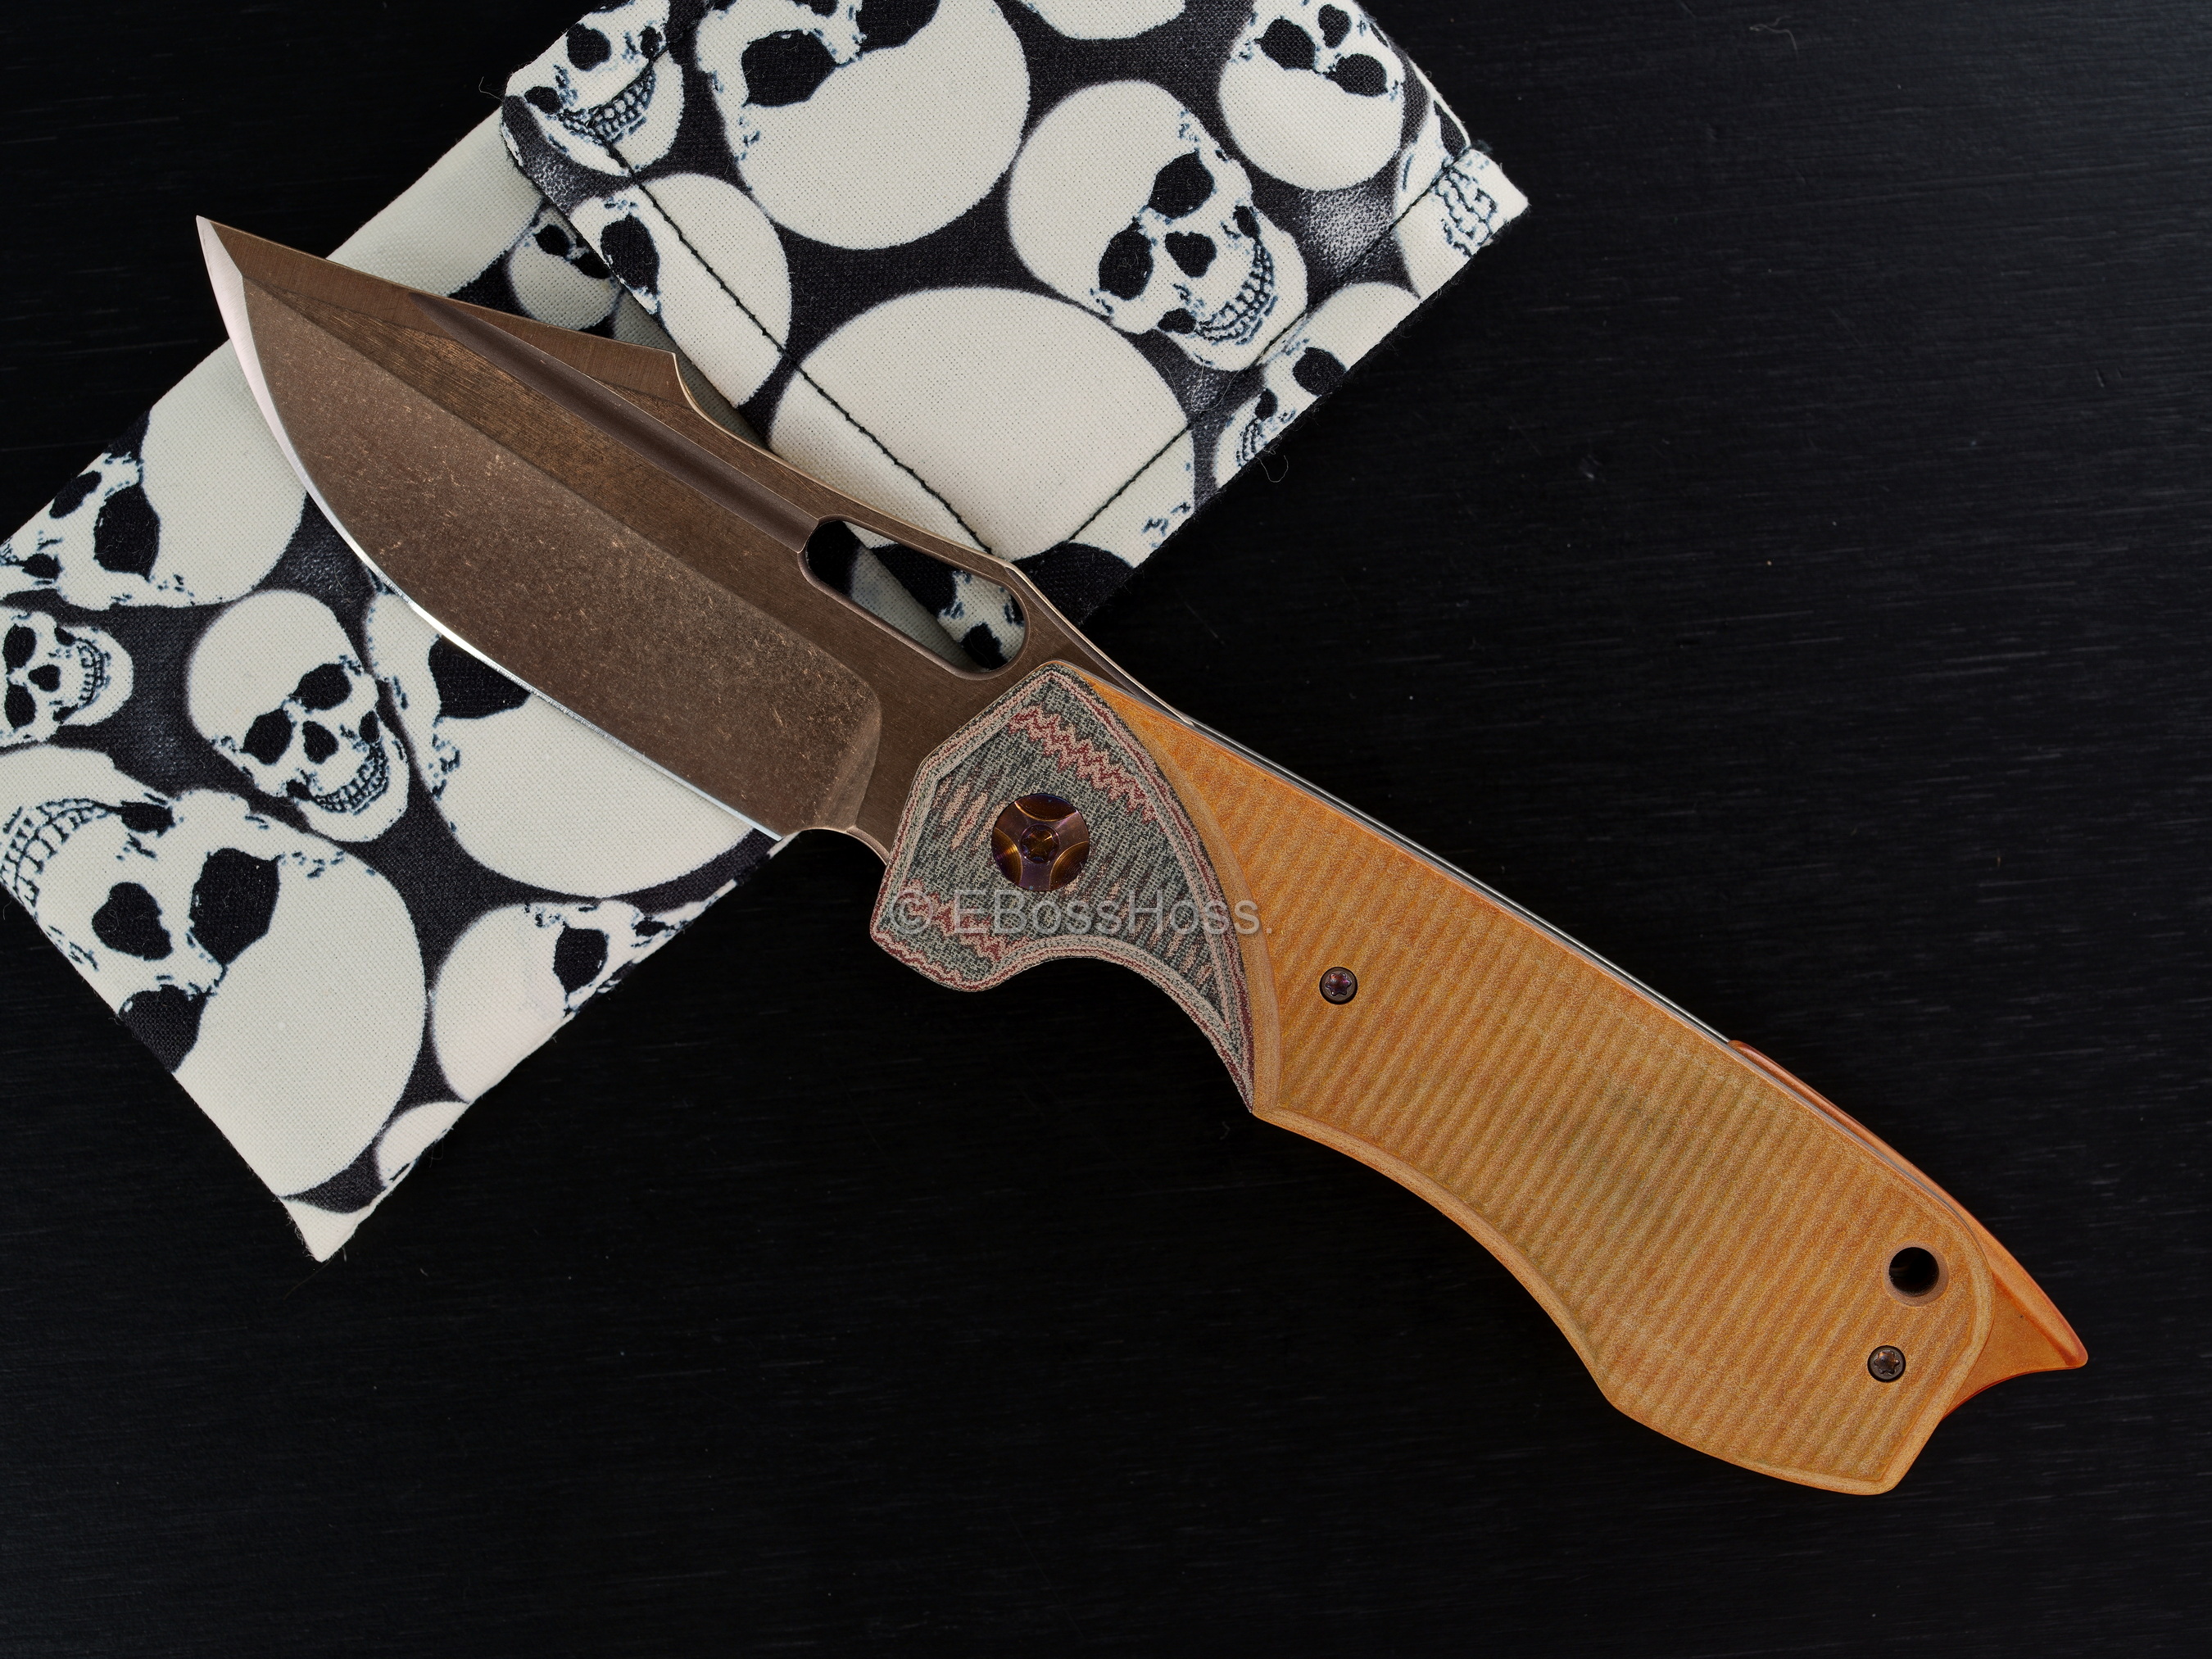 JB Stout Custom Blood and Thunder V1 - 1st one with Fluted Micarta Handle